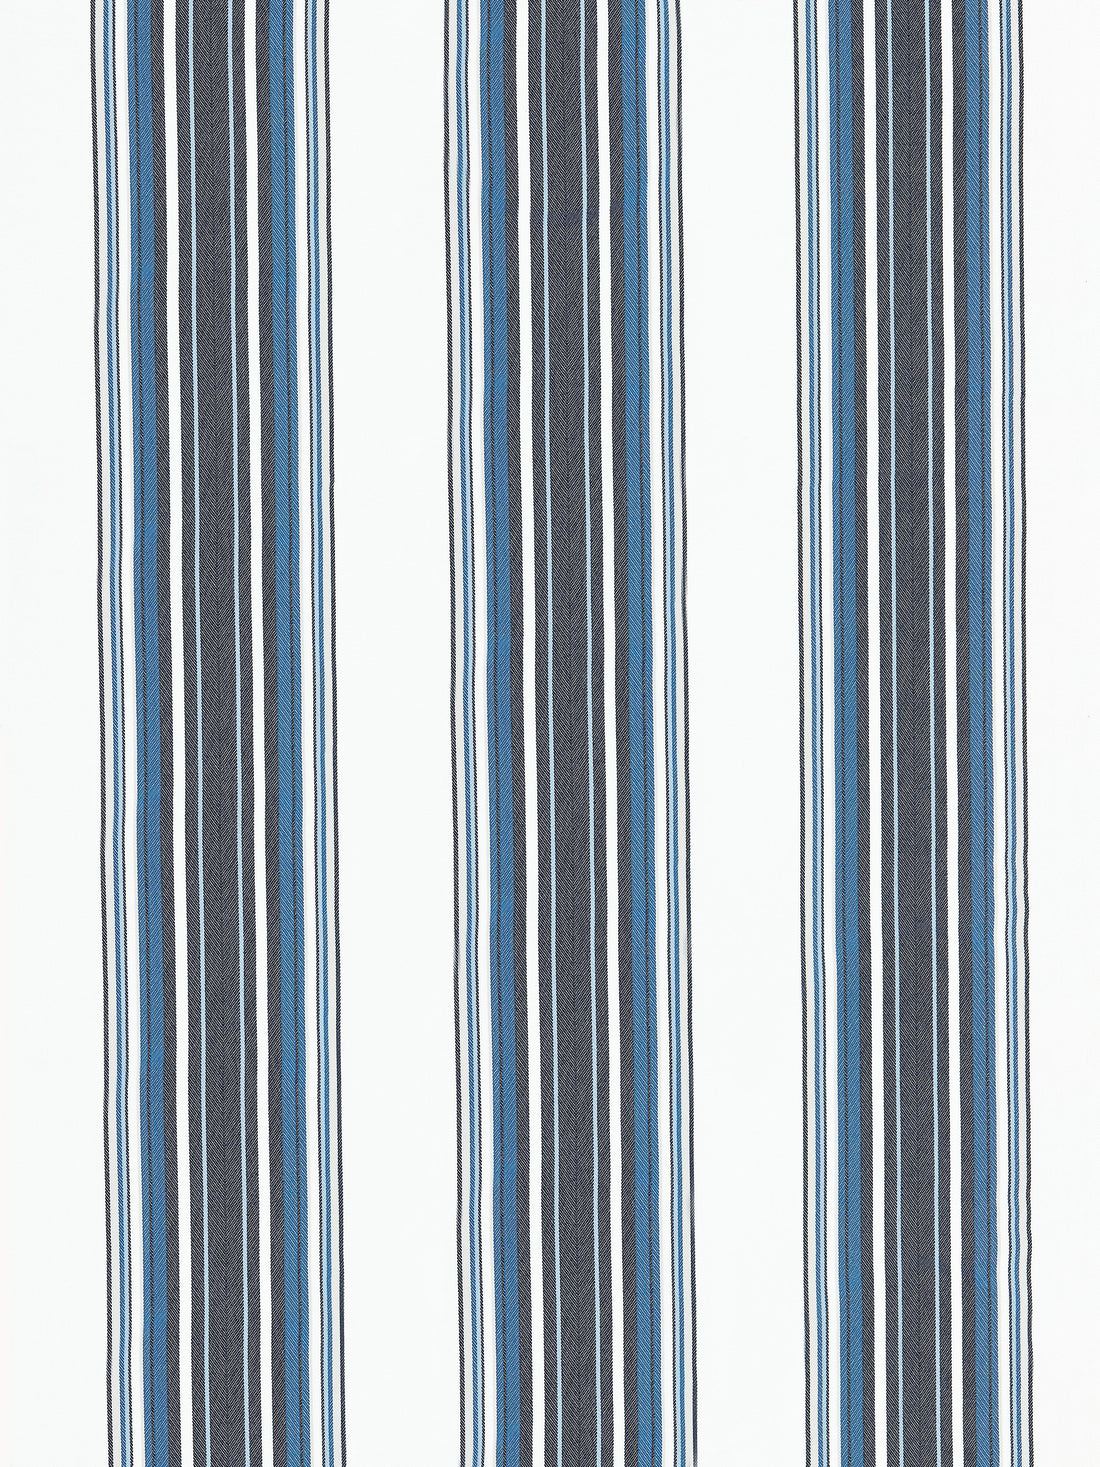 Cabana Stripe fabric in indigo color - pattern number SC 000227063 - by Scalamandre in the Scalamandre Fabrics Book 1 collection